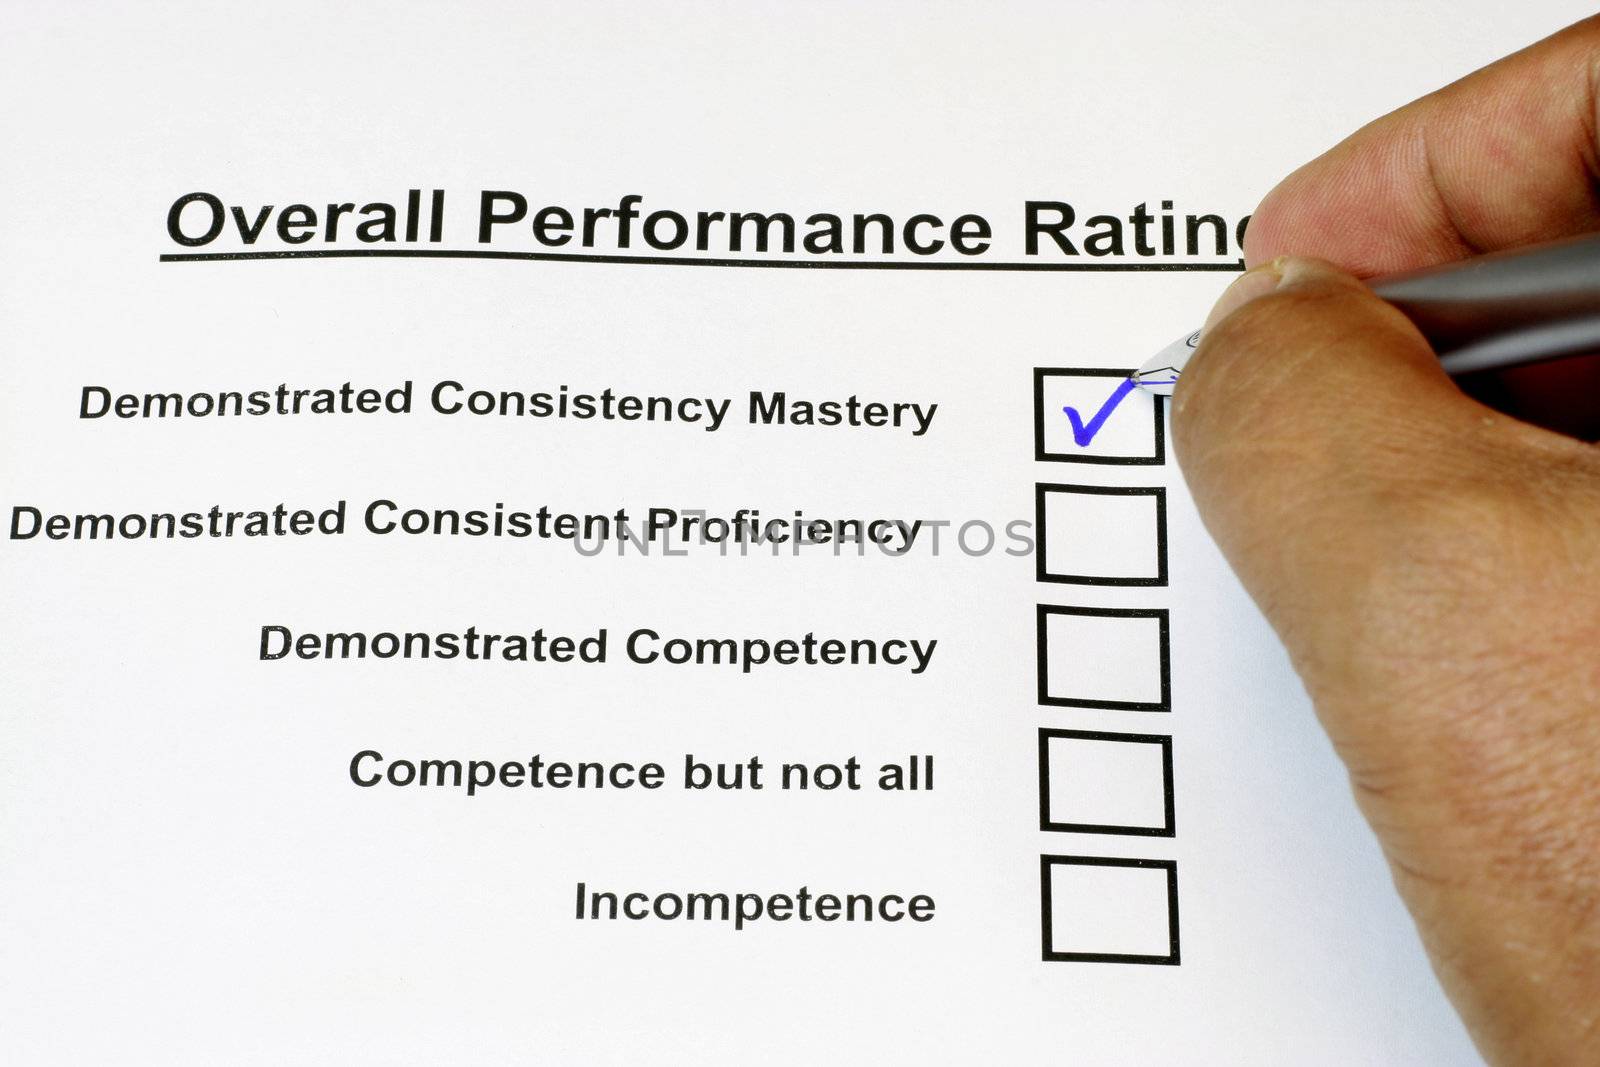 Overall Performance Rating Form by sacatani